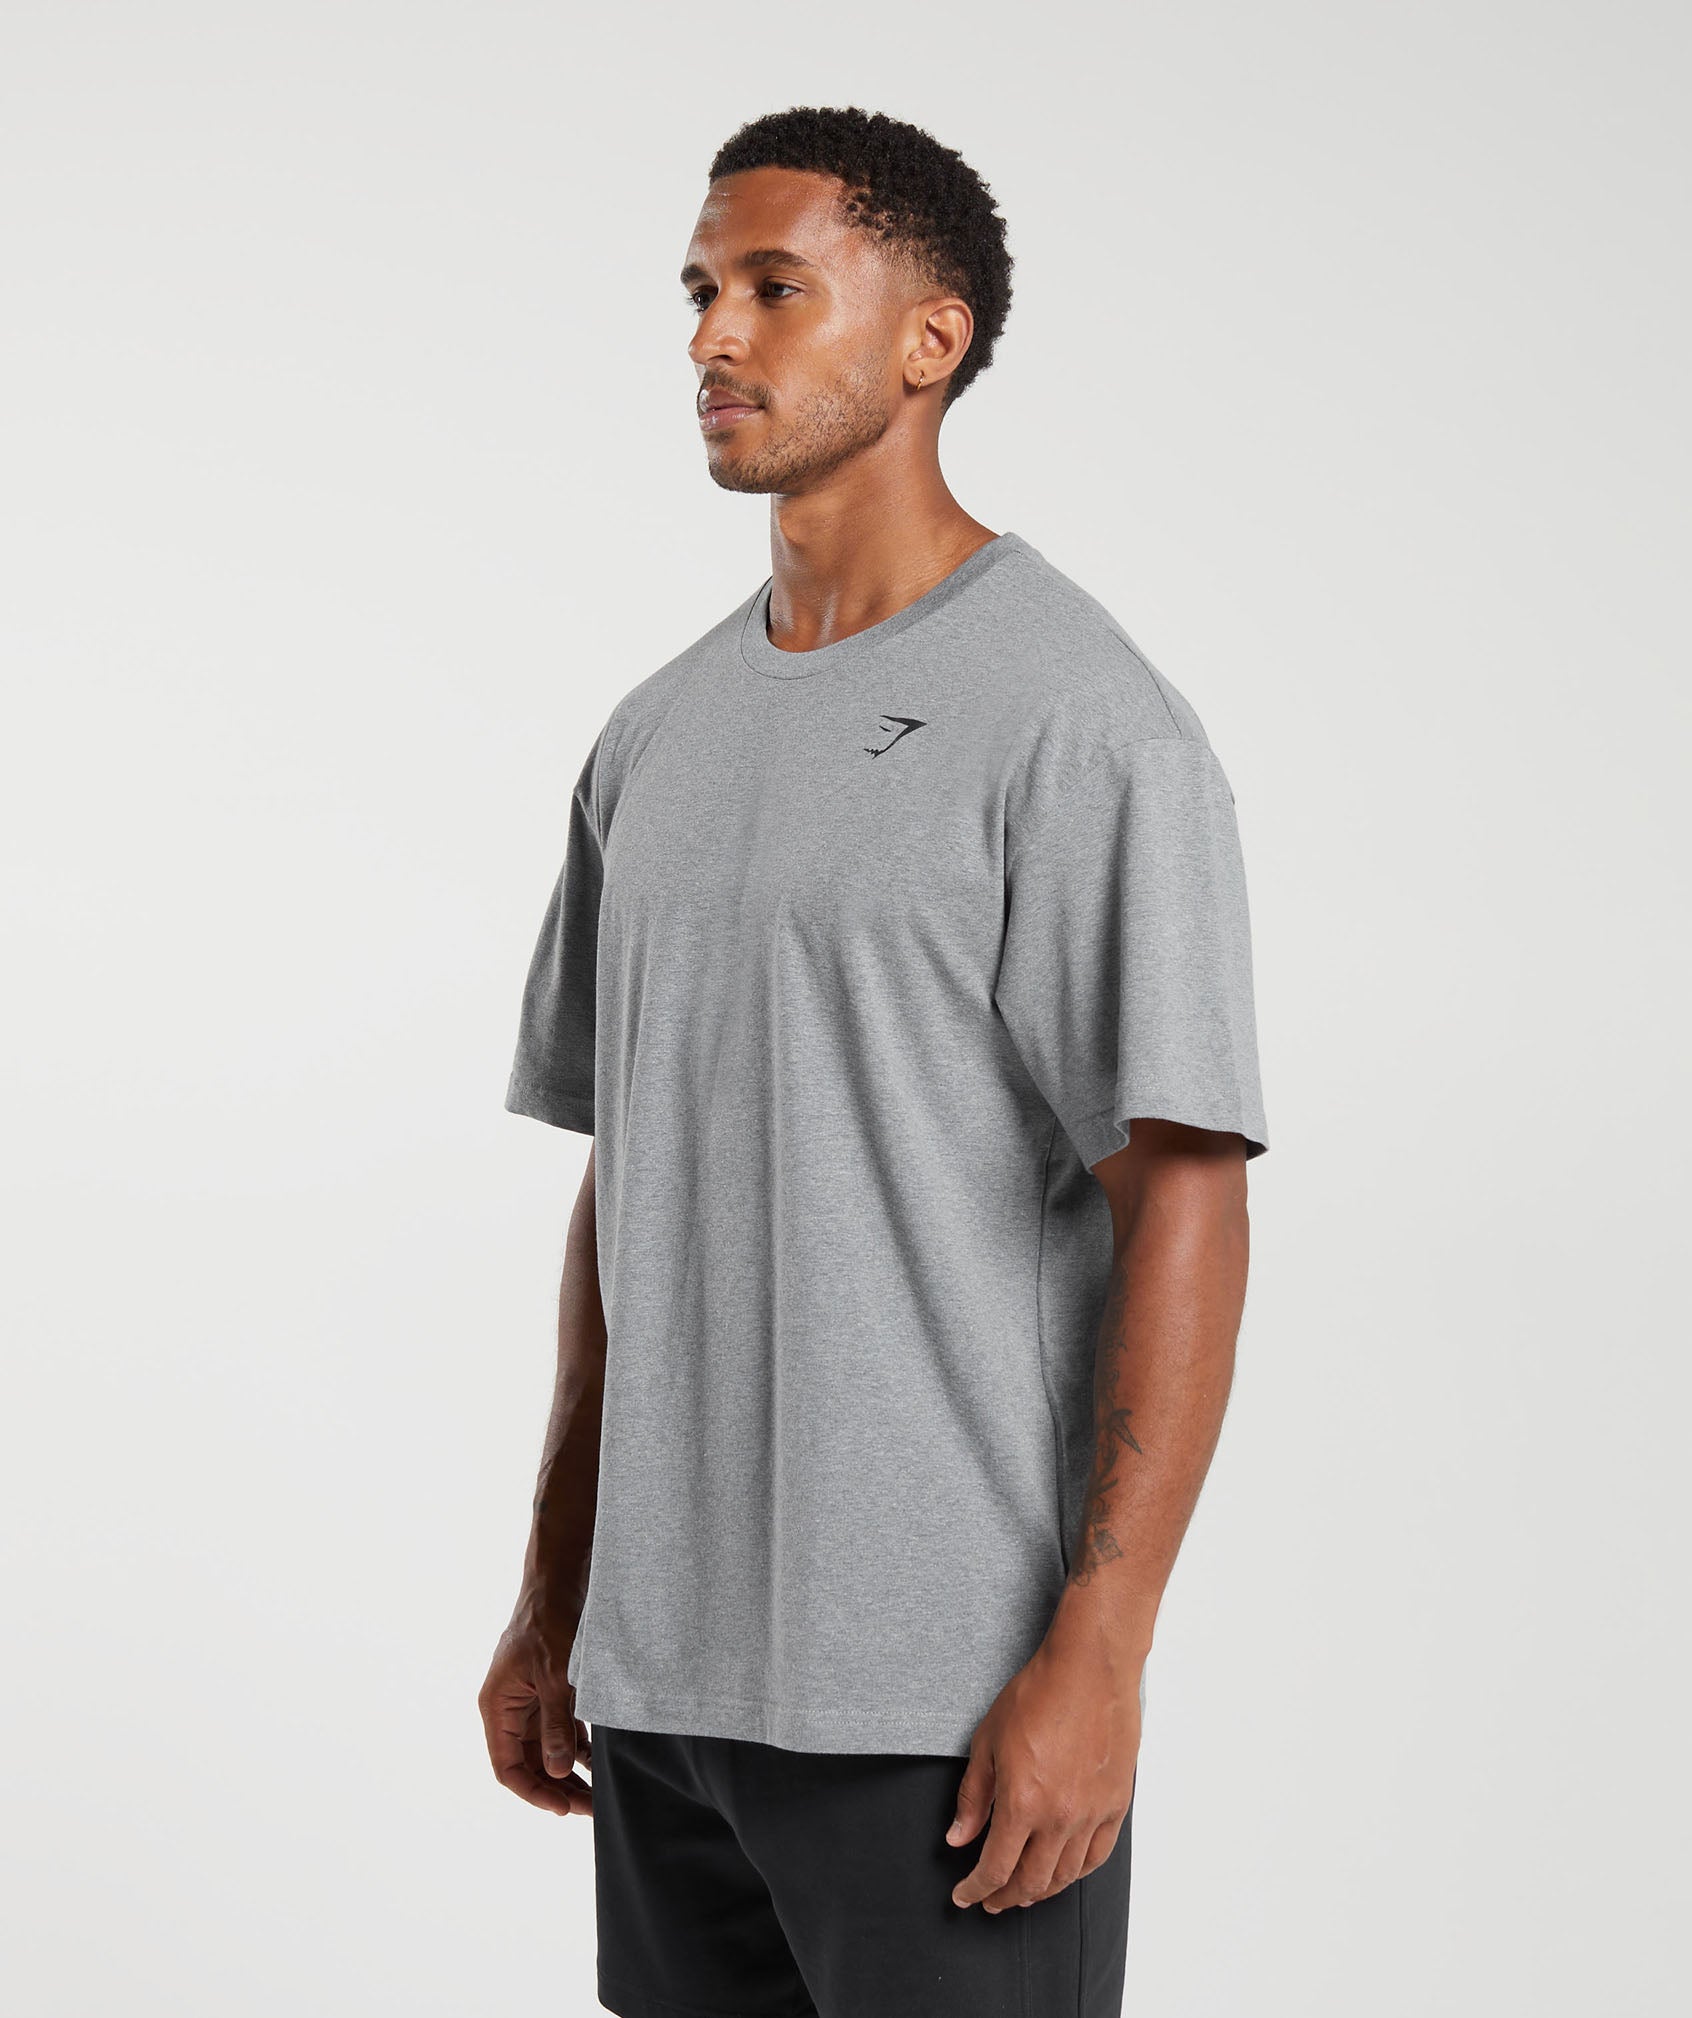 Essential Oversized T-Shirt in Charcoal Grey Marl - view 3